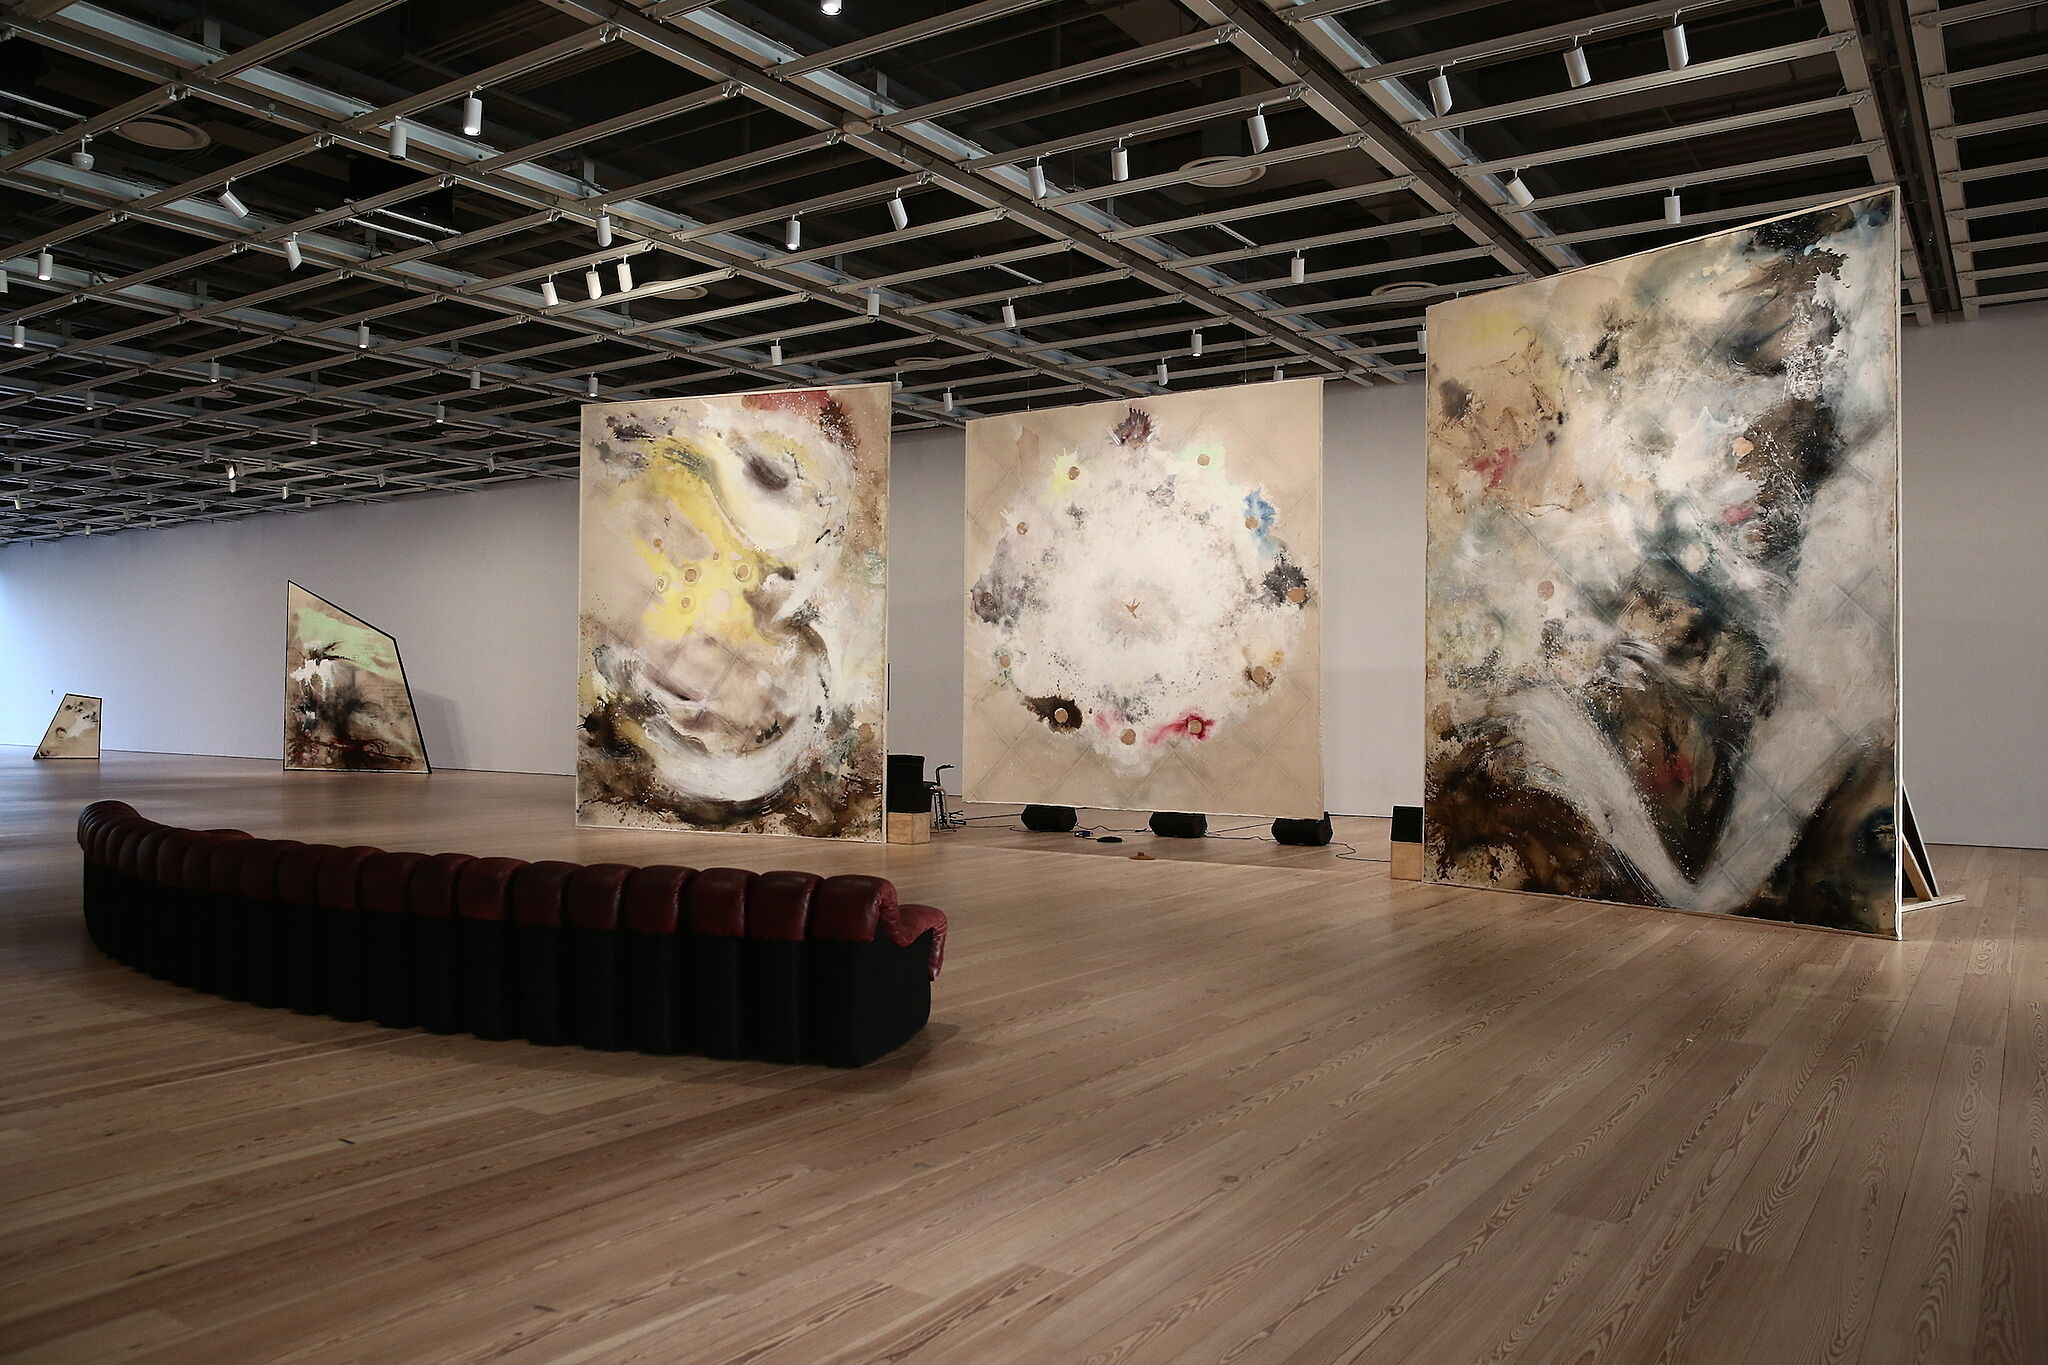 Paintings and couches form a lounge in Lucy Dodd's installation.